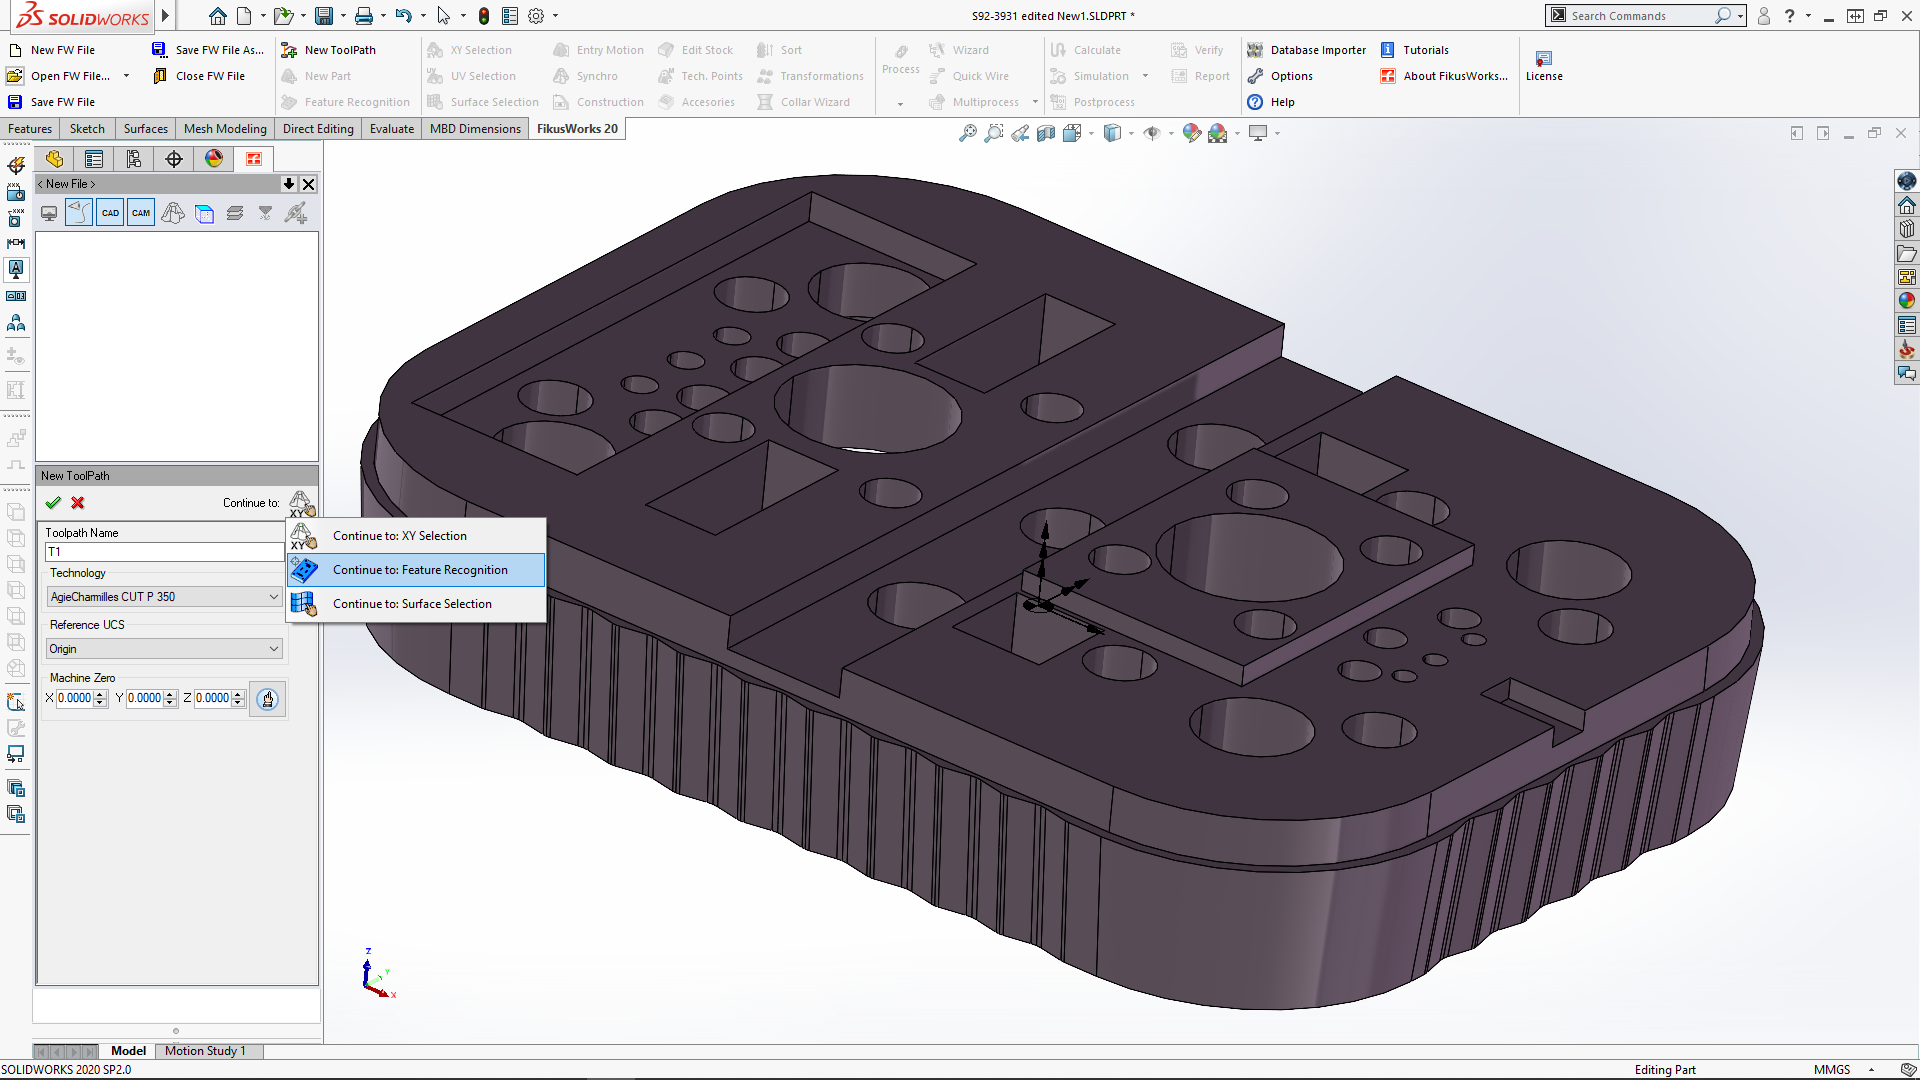 FikusWorks a comprehensive wire EDM solution or add-in for your Solidworks CAD